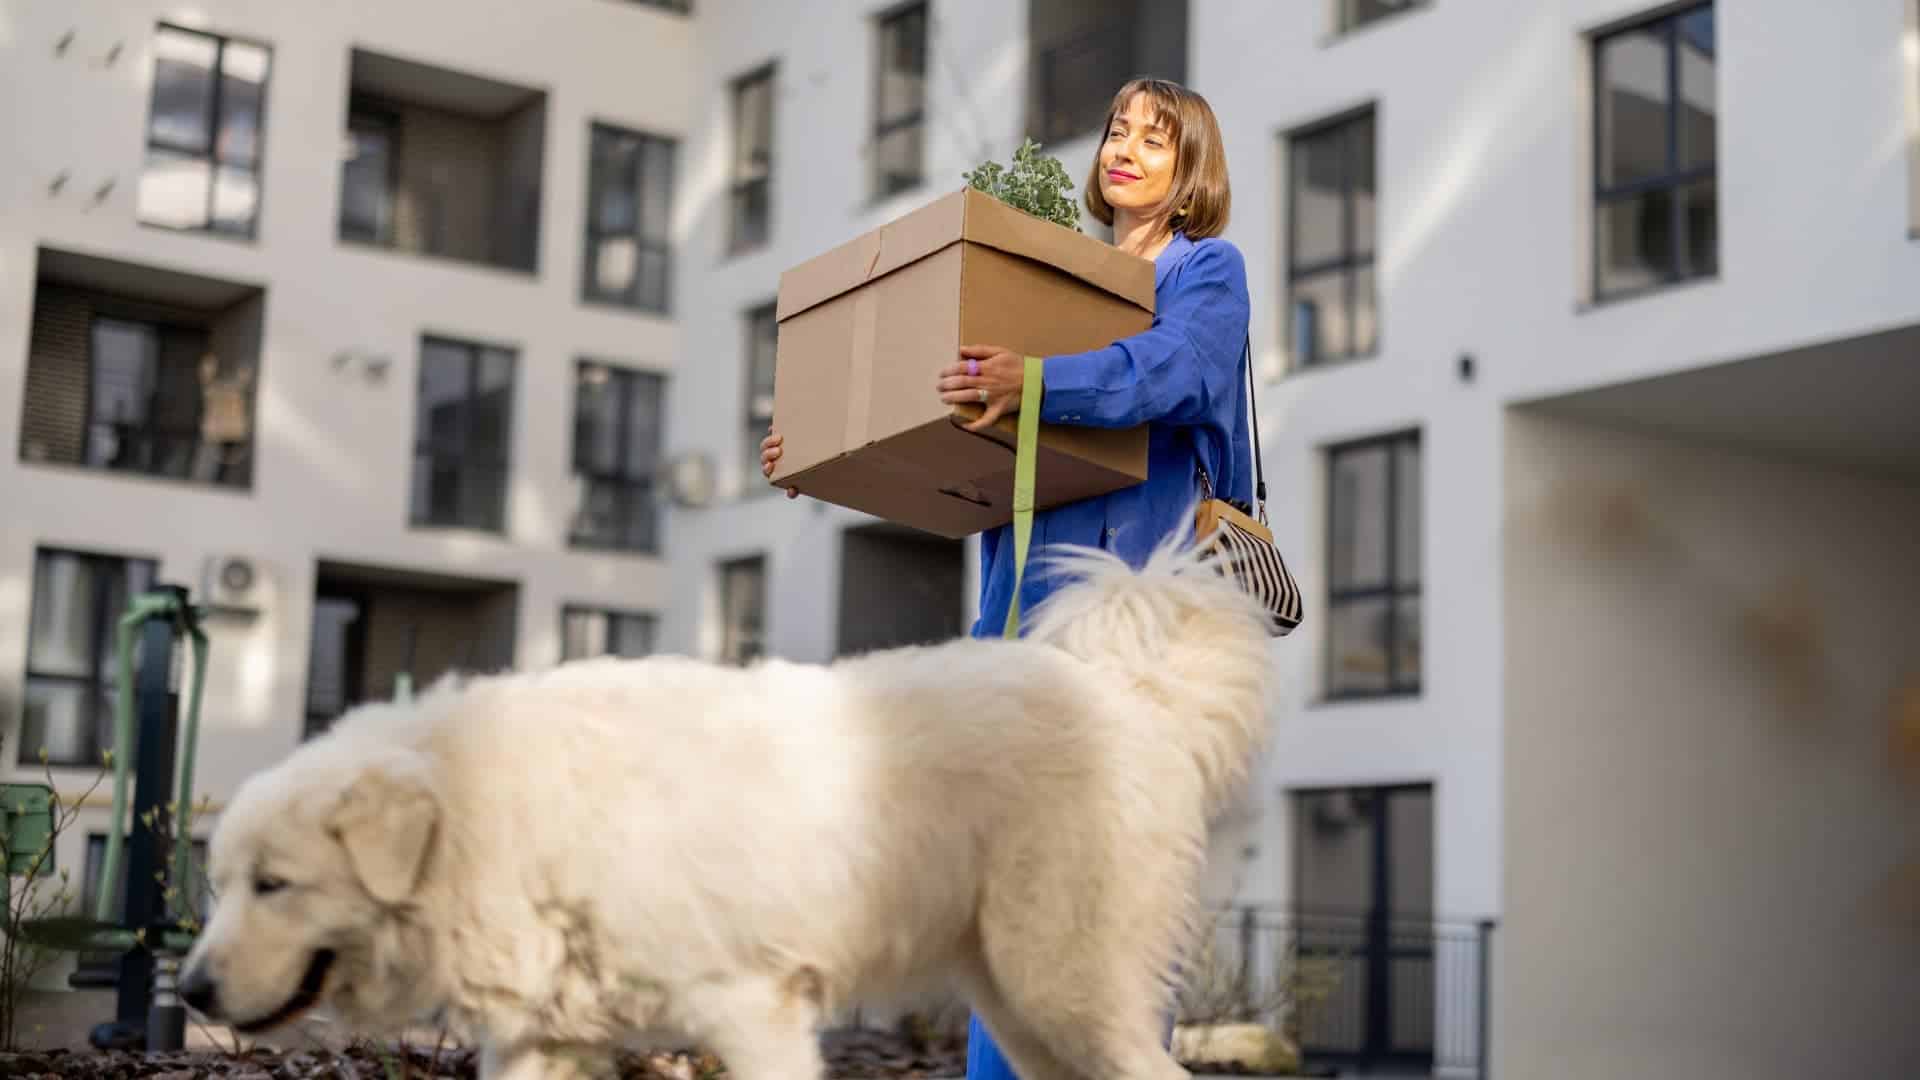 A woman in a blue outfit carrying a cardboard box with a potted plant stands in front of a modern apartment building. She is smiling and has a large white dog on a leash walking beside her. The background shows several windows and balconies of the building.